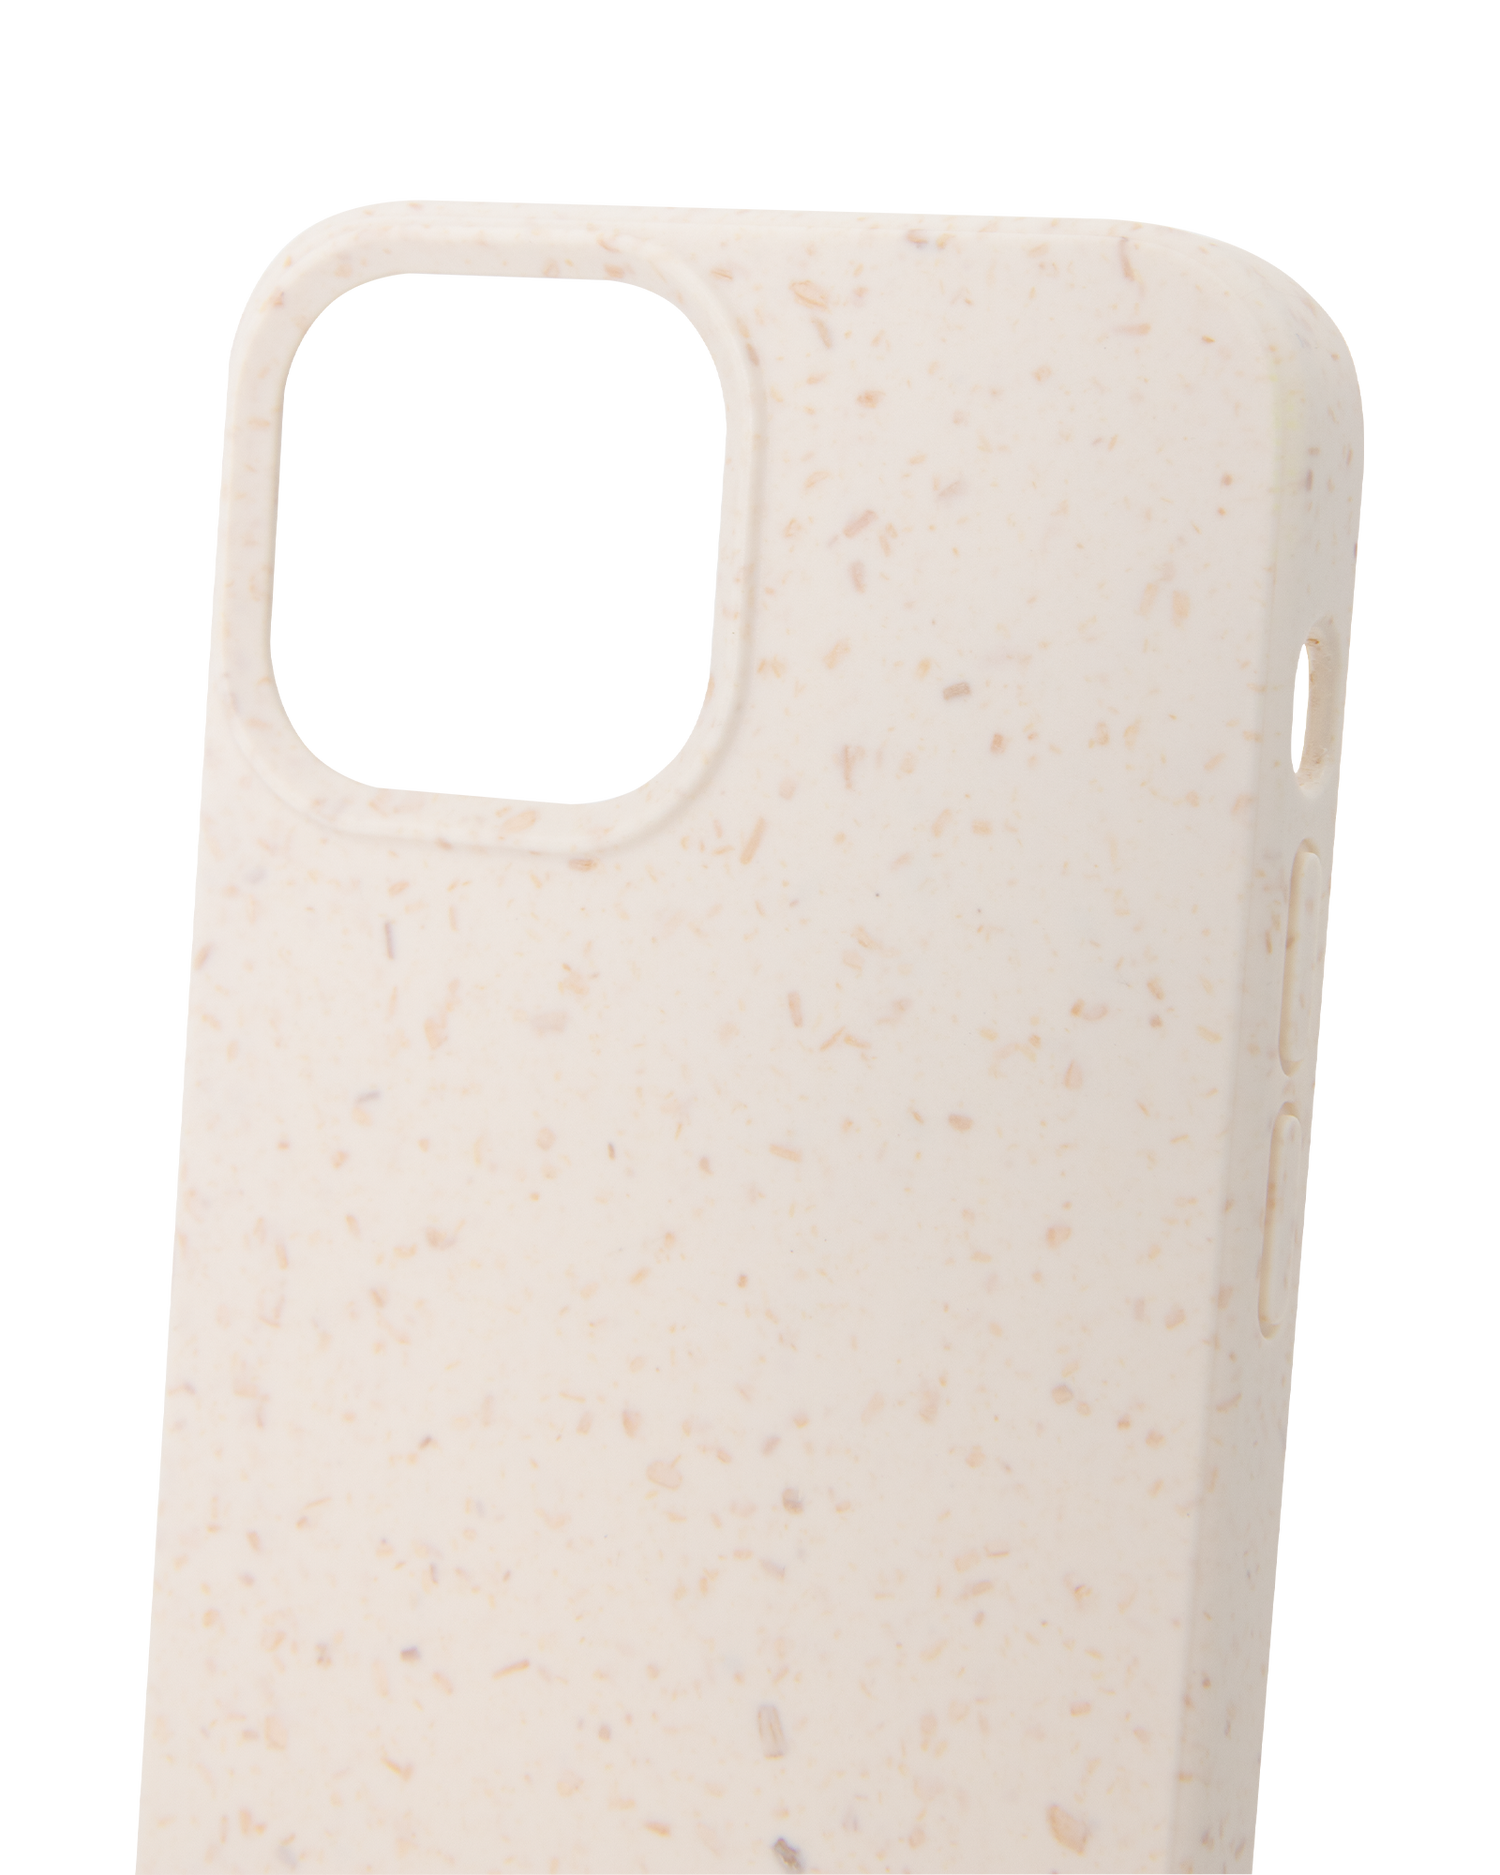 White Eco-Friendly Phone Case for Apple iPhone 12 mini: Details outside